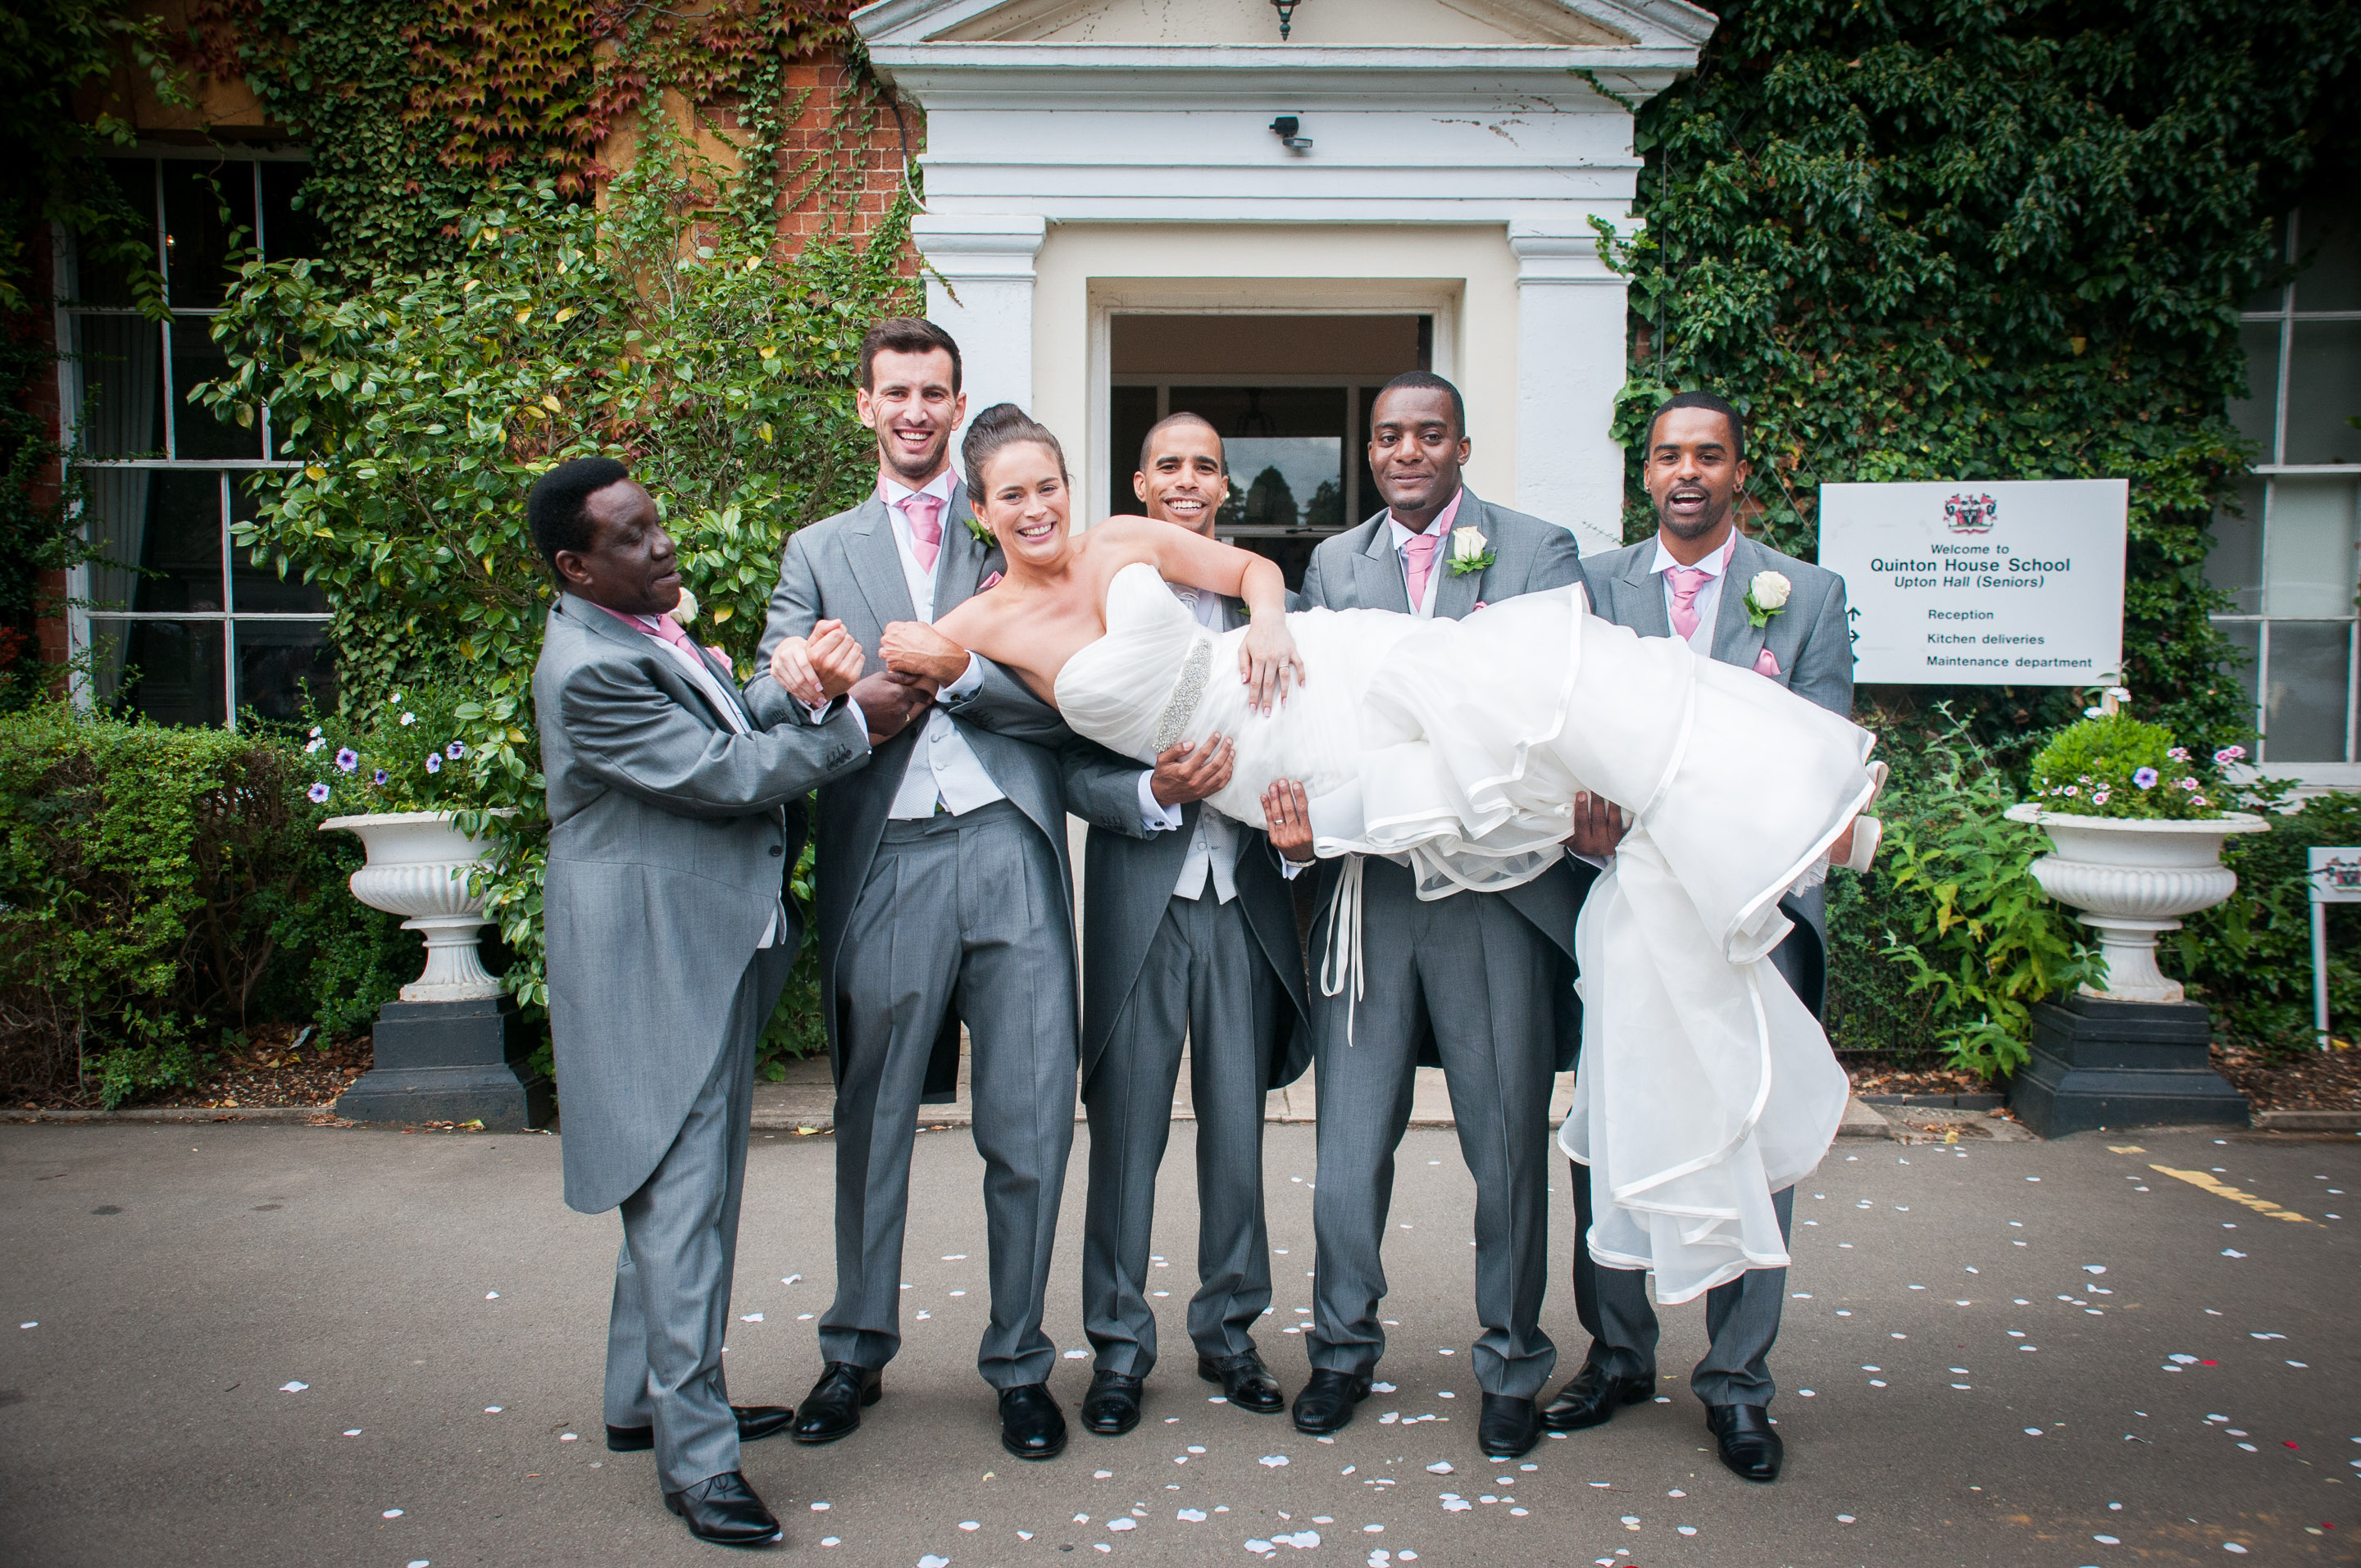 Groomsmen hold up the bride